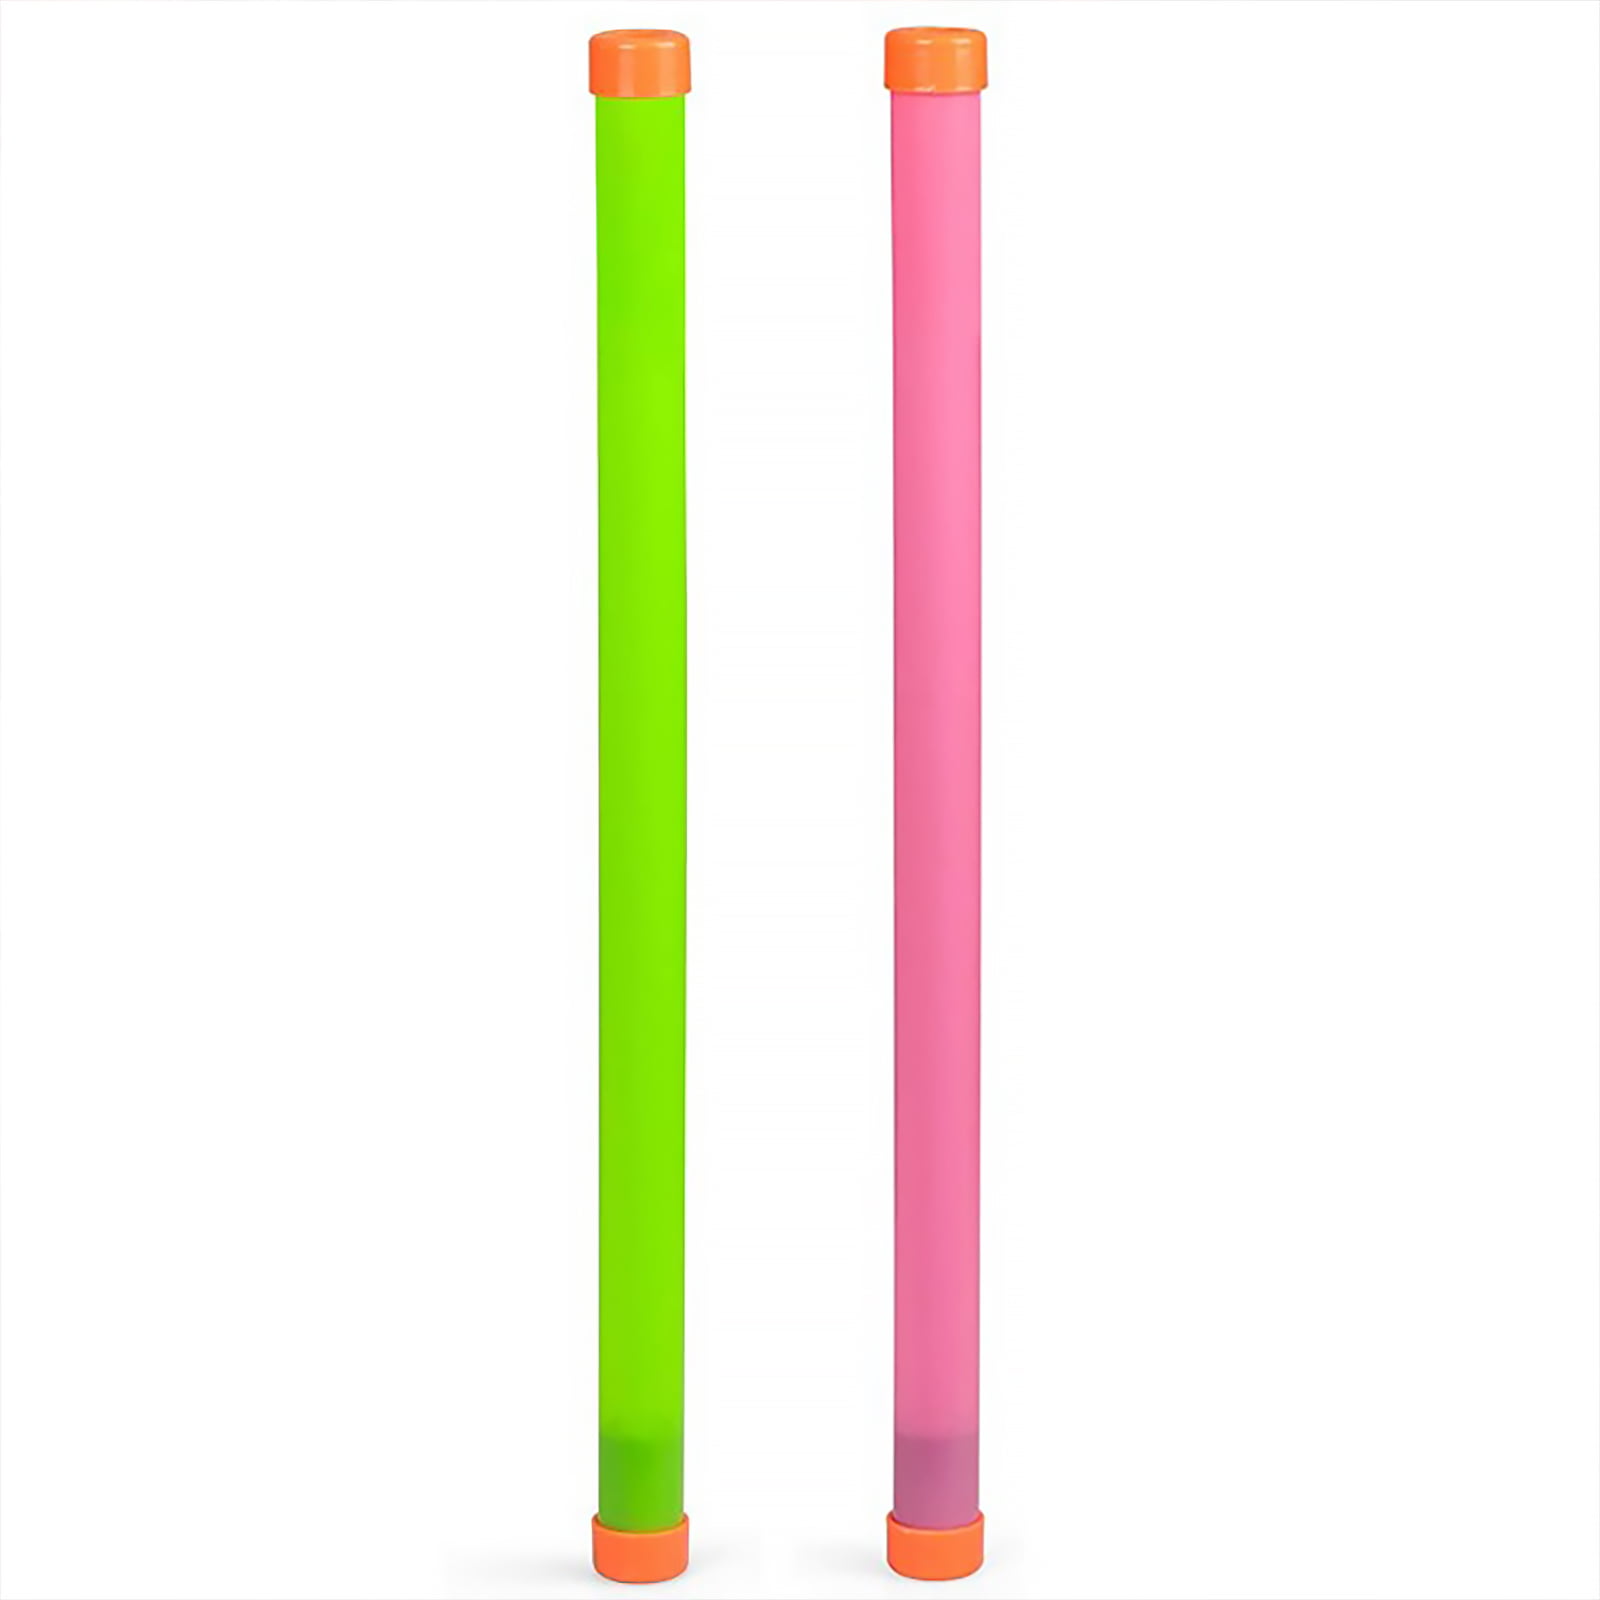 Random Color Groan Tube Noise Makers Noisemakers Groan Sound Stick Toy 